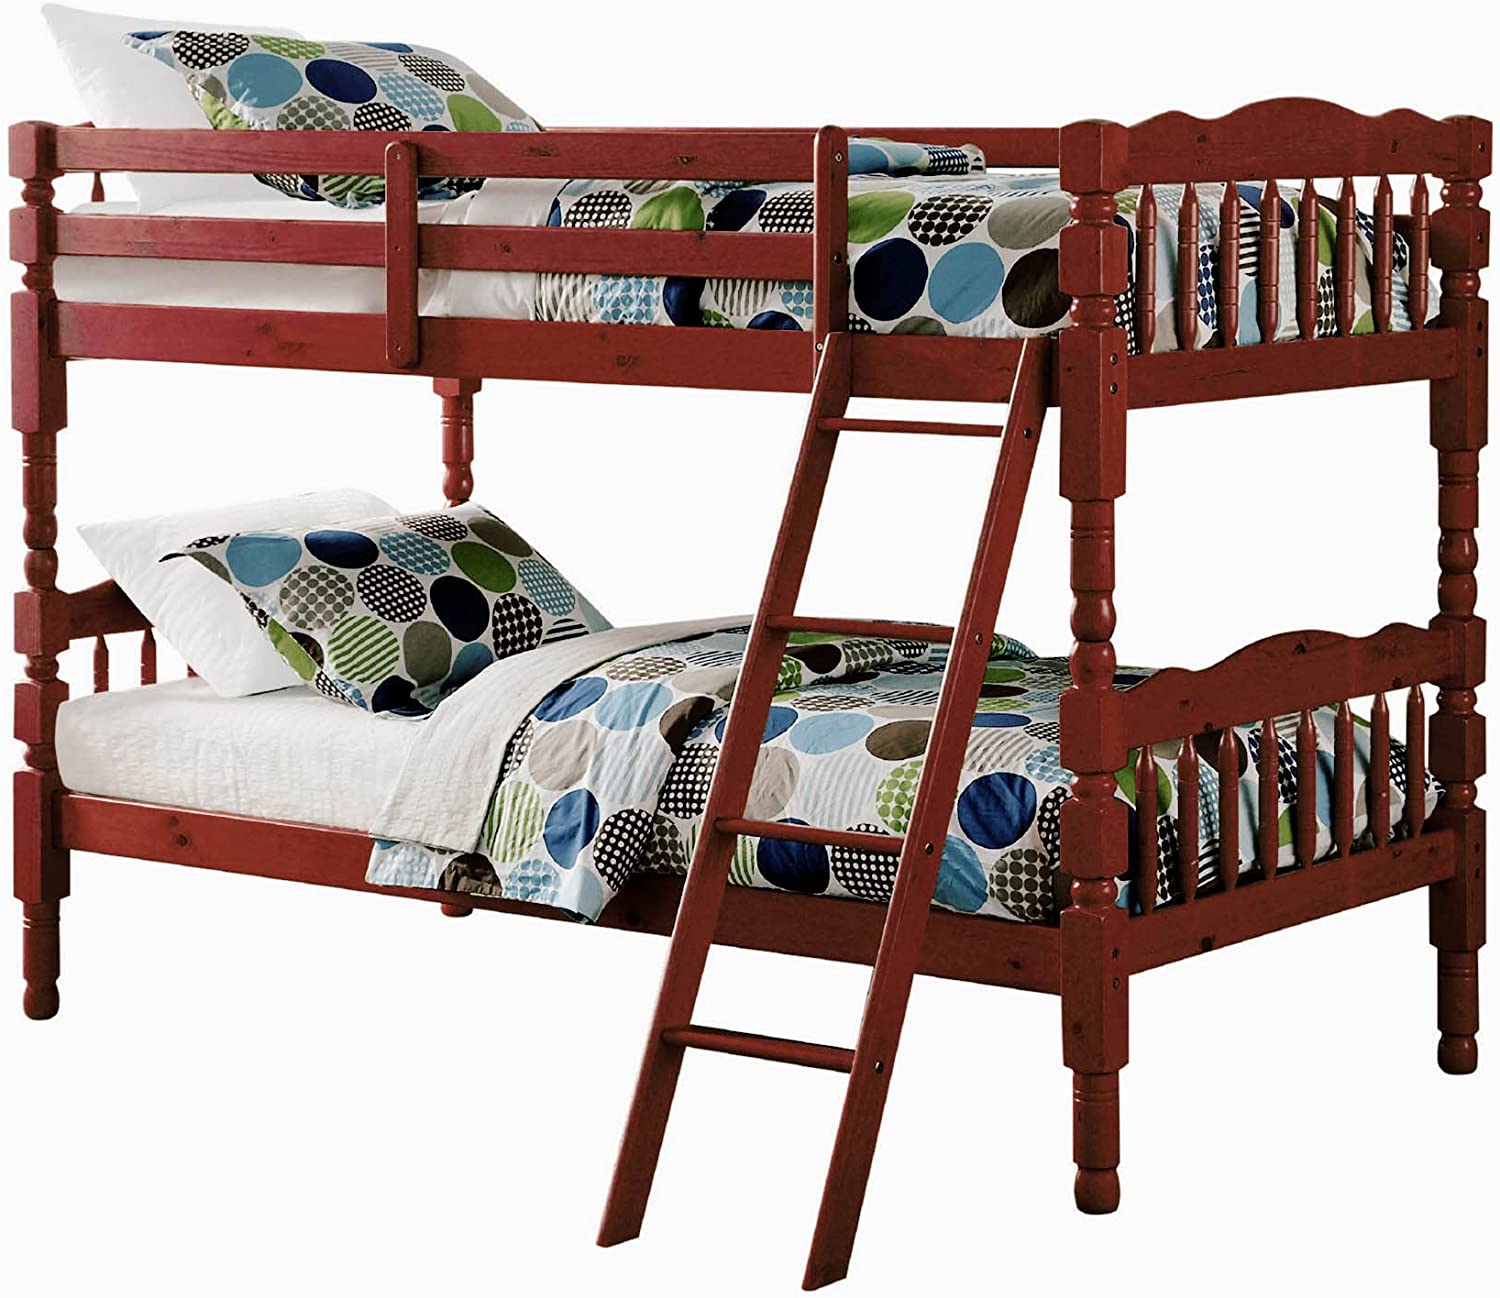 Better Home Products Charlotte Twin Over Twin Solid Wood Bunk Bed in Mahogany